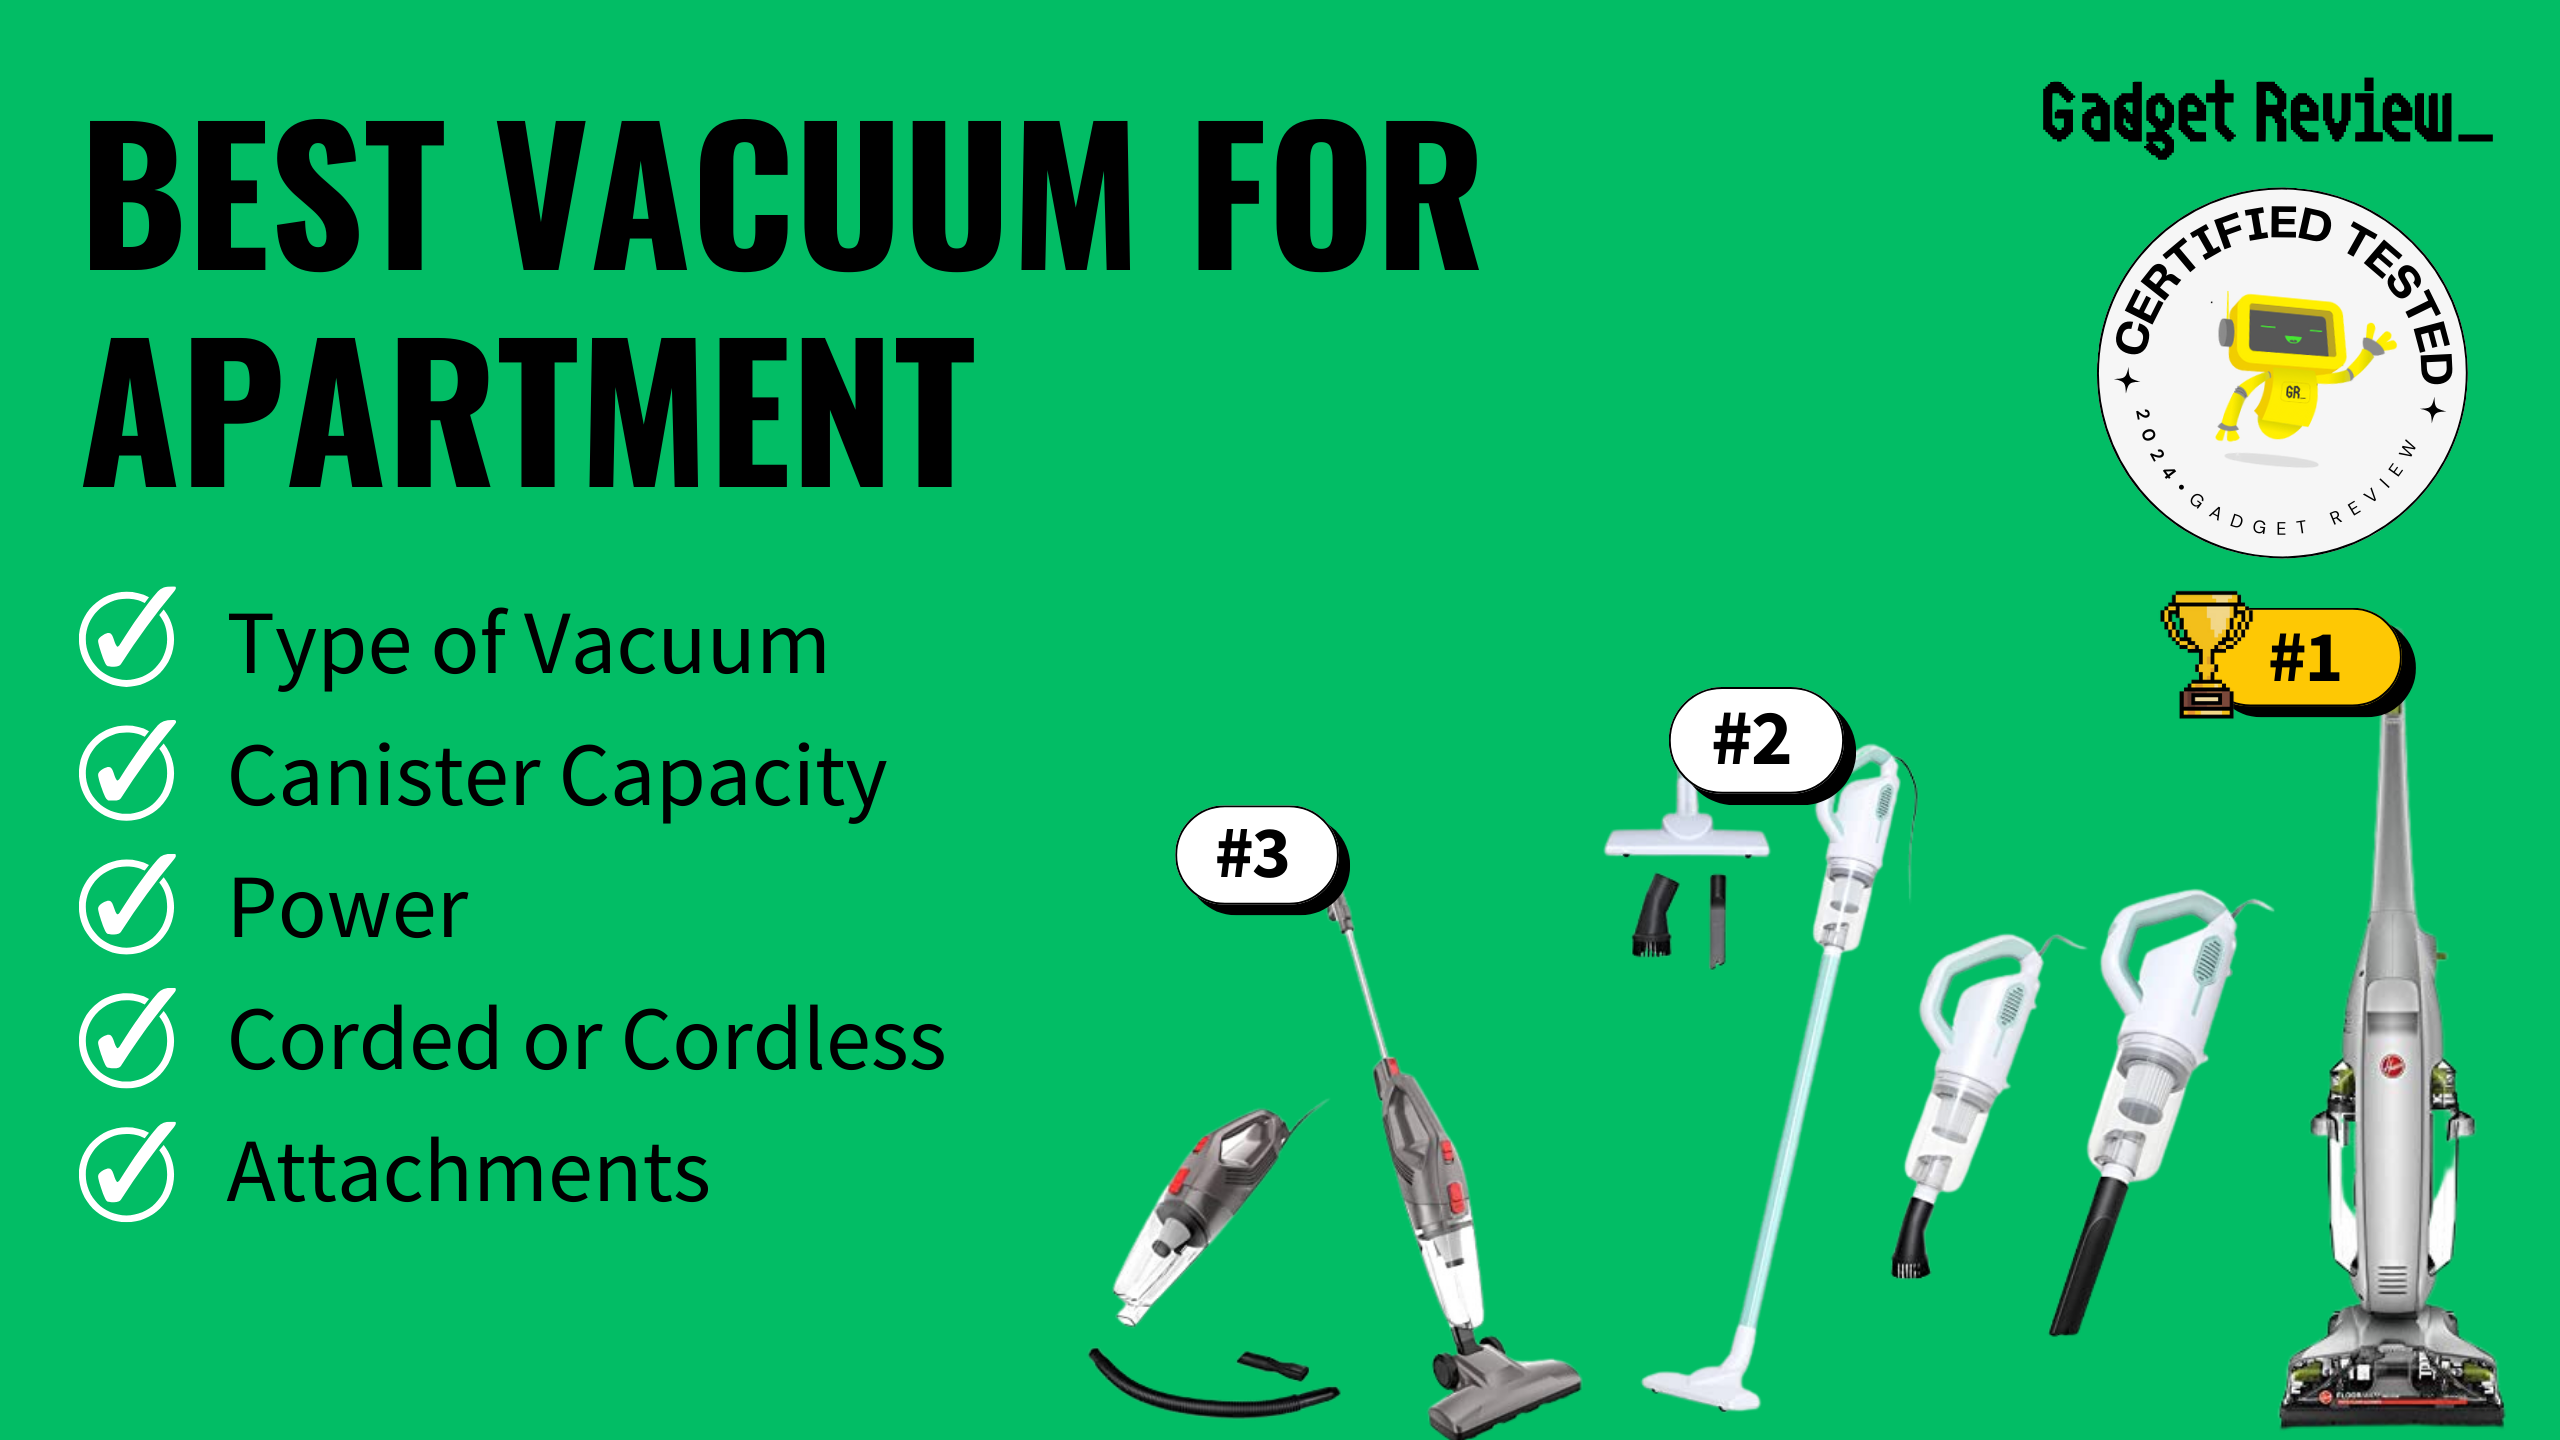 best vacuum for apartment guide that shows the top best vacuum cleaner model